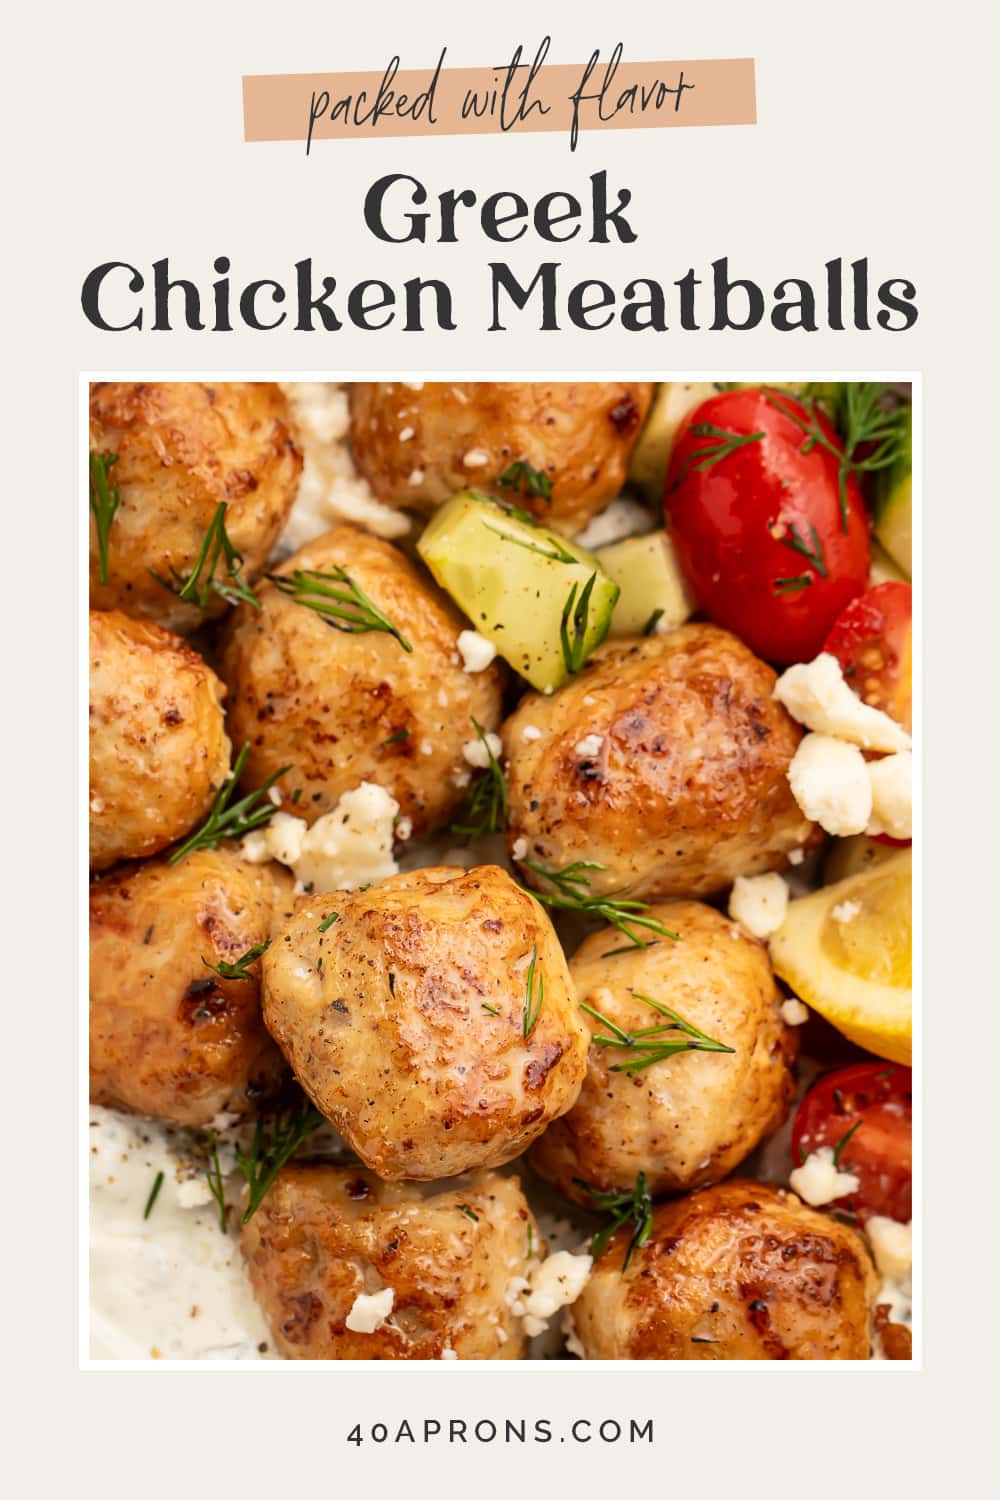 Pin graphic for Greek chicken meatballs.